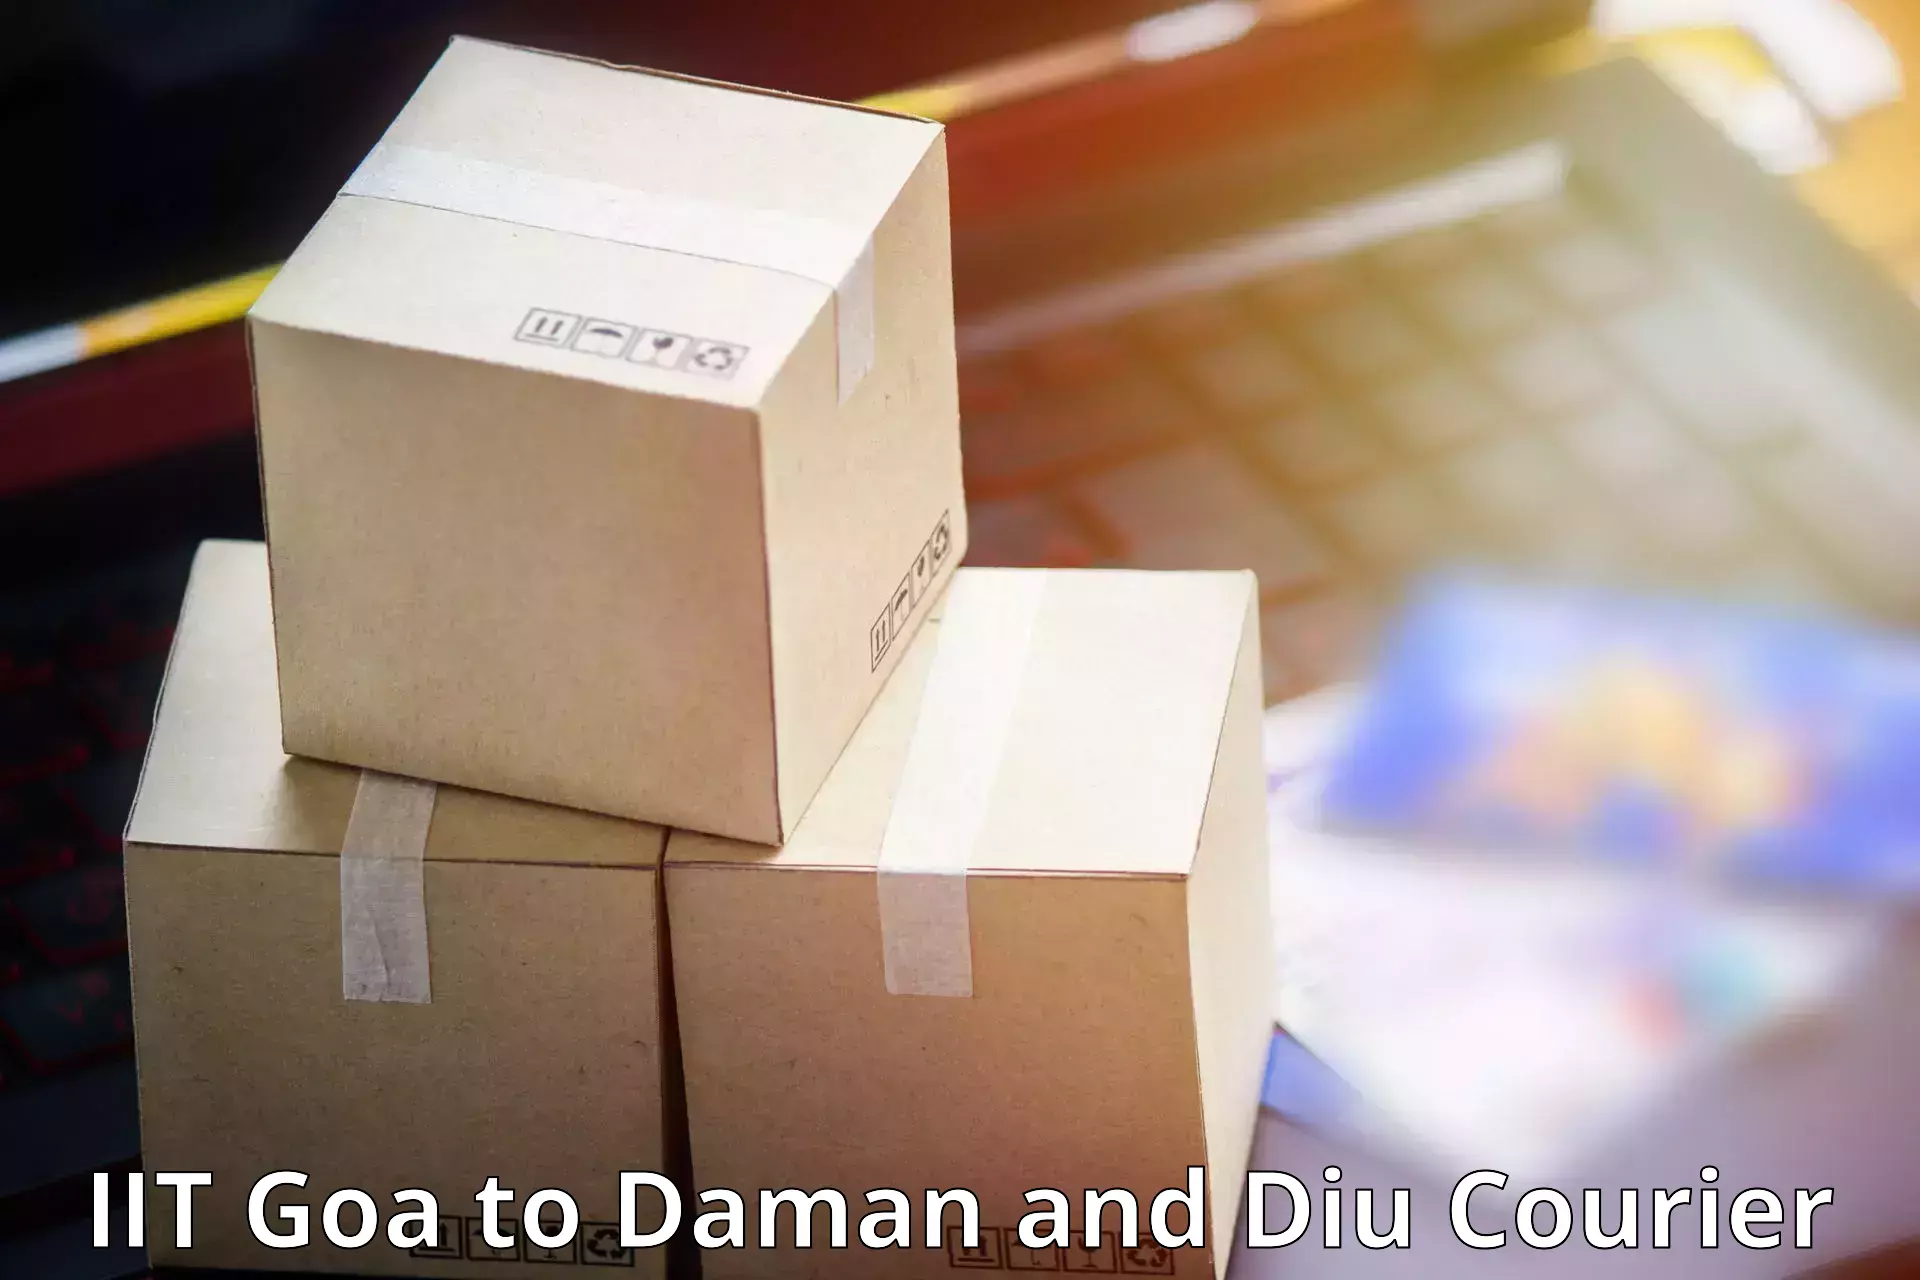 Global shipping solutions in IIT Goa to Daman and Diu